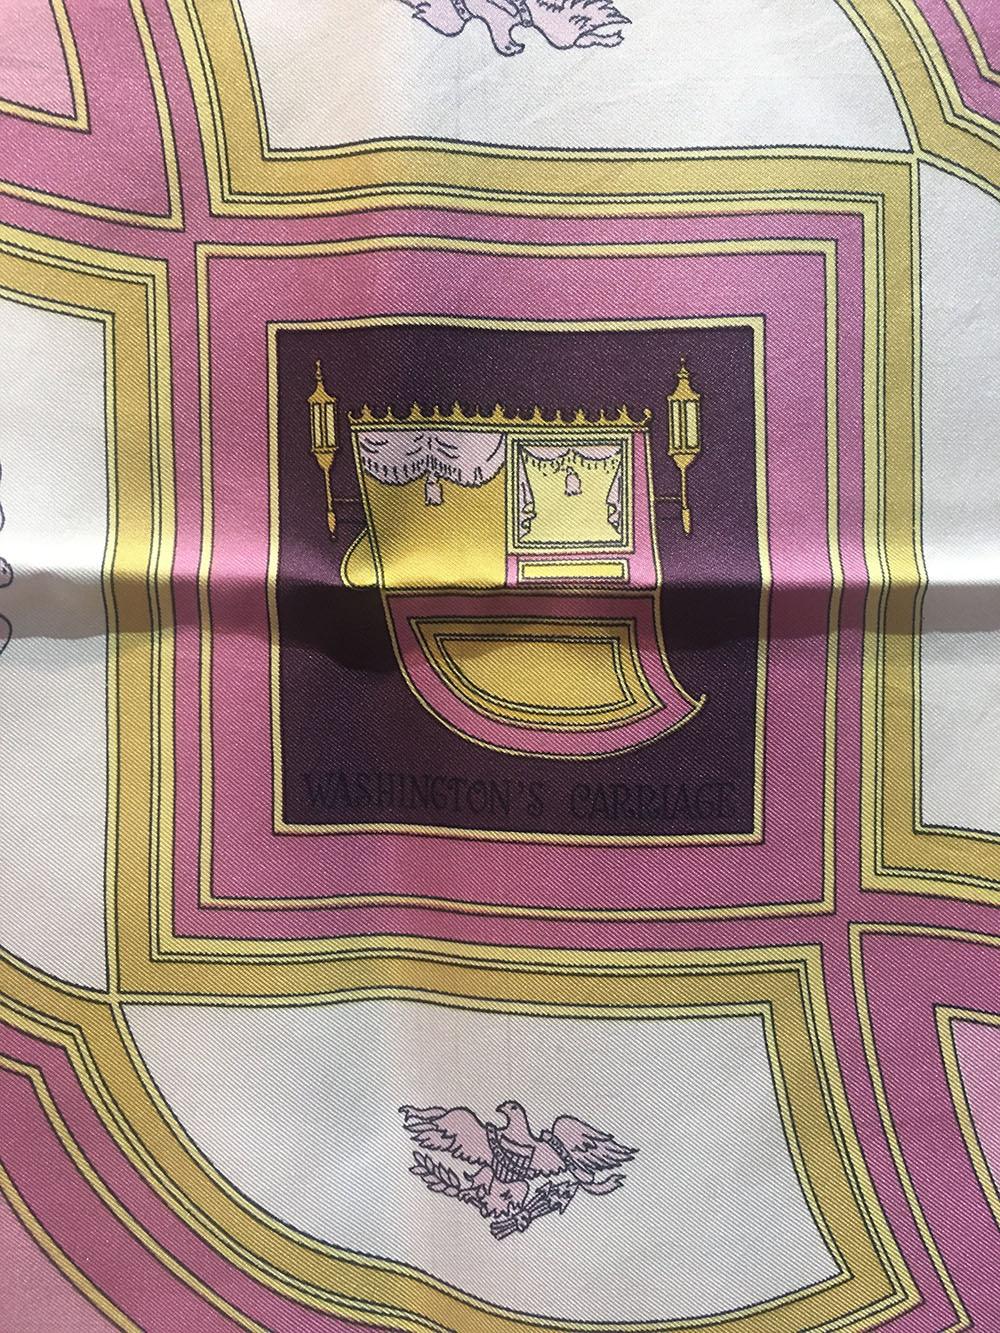 GORGEOUS Hermes Vintage Washington's Carriage Silk Scarf in Rose c1970s in excellent condition.  Original silk screen design c1978 by Caty Latham features a centered square illustration of an antique carriage in pink and yellow over a dark purple